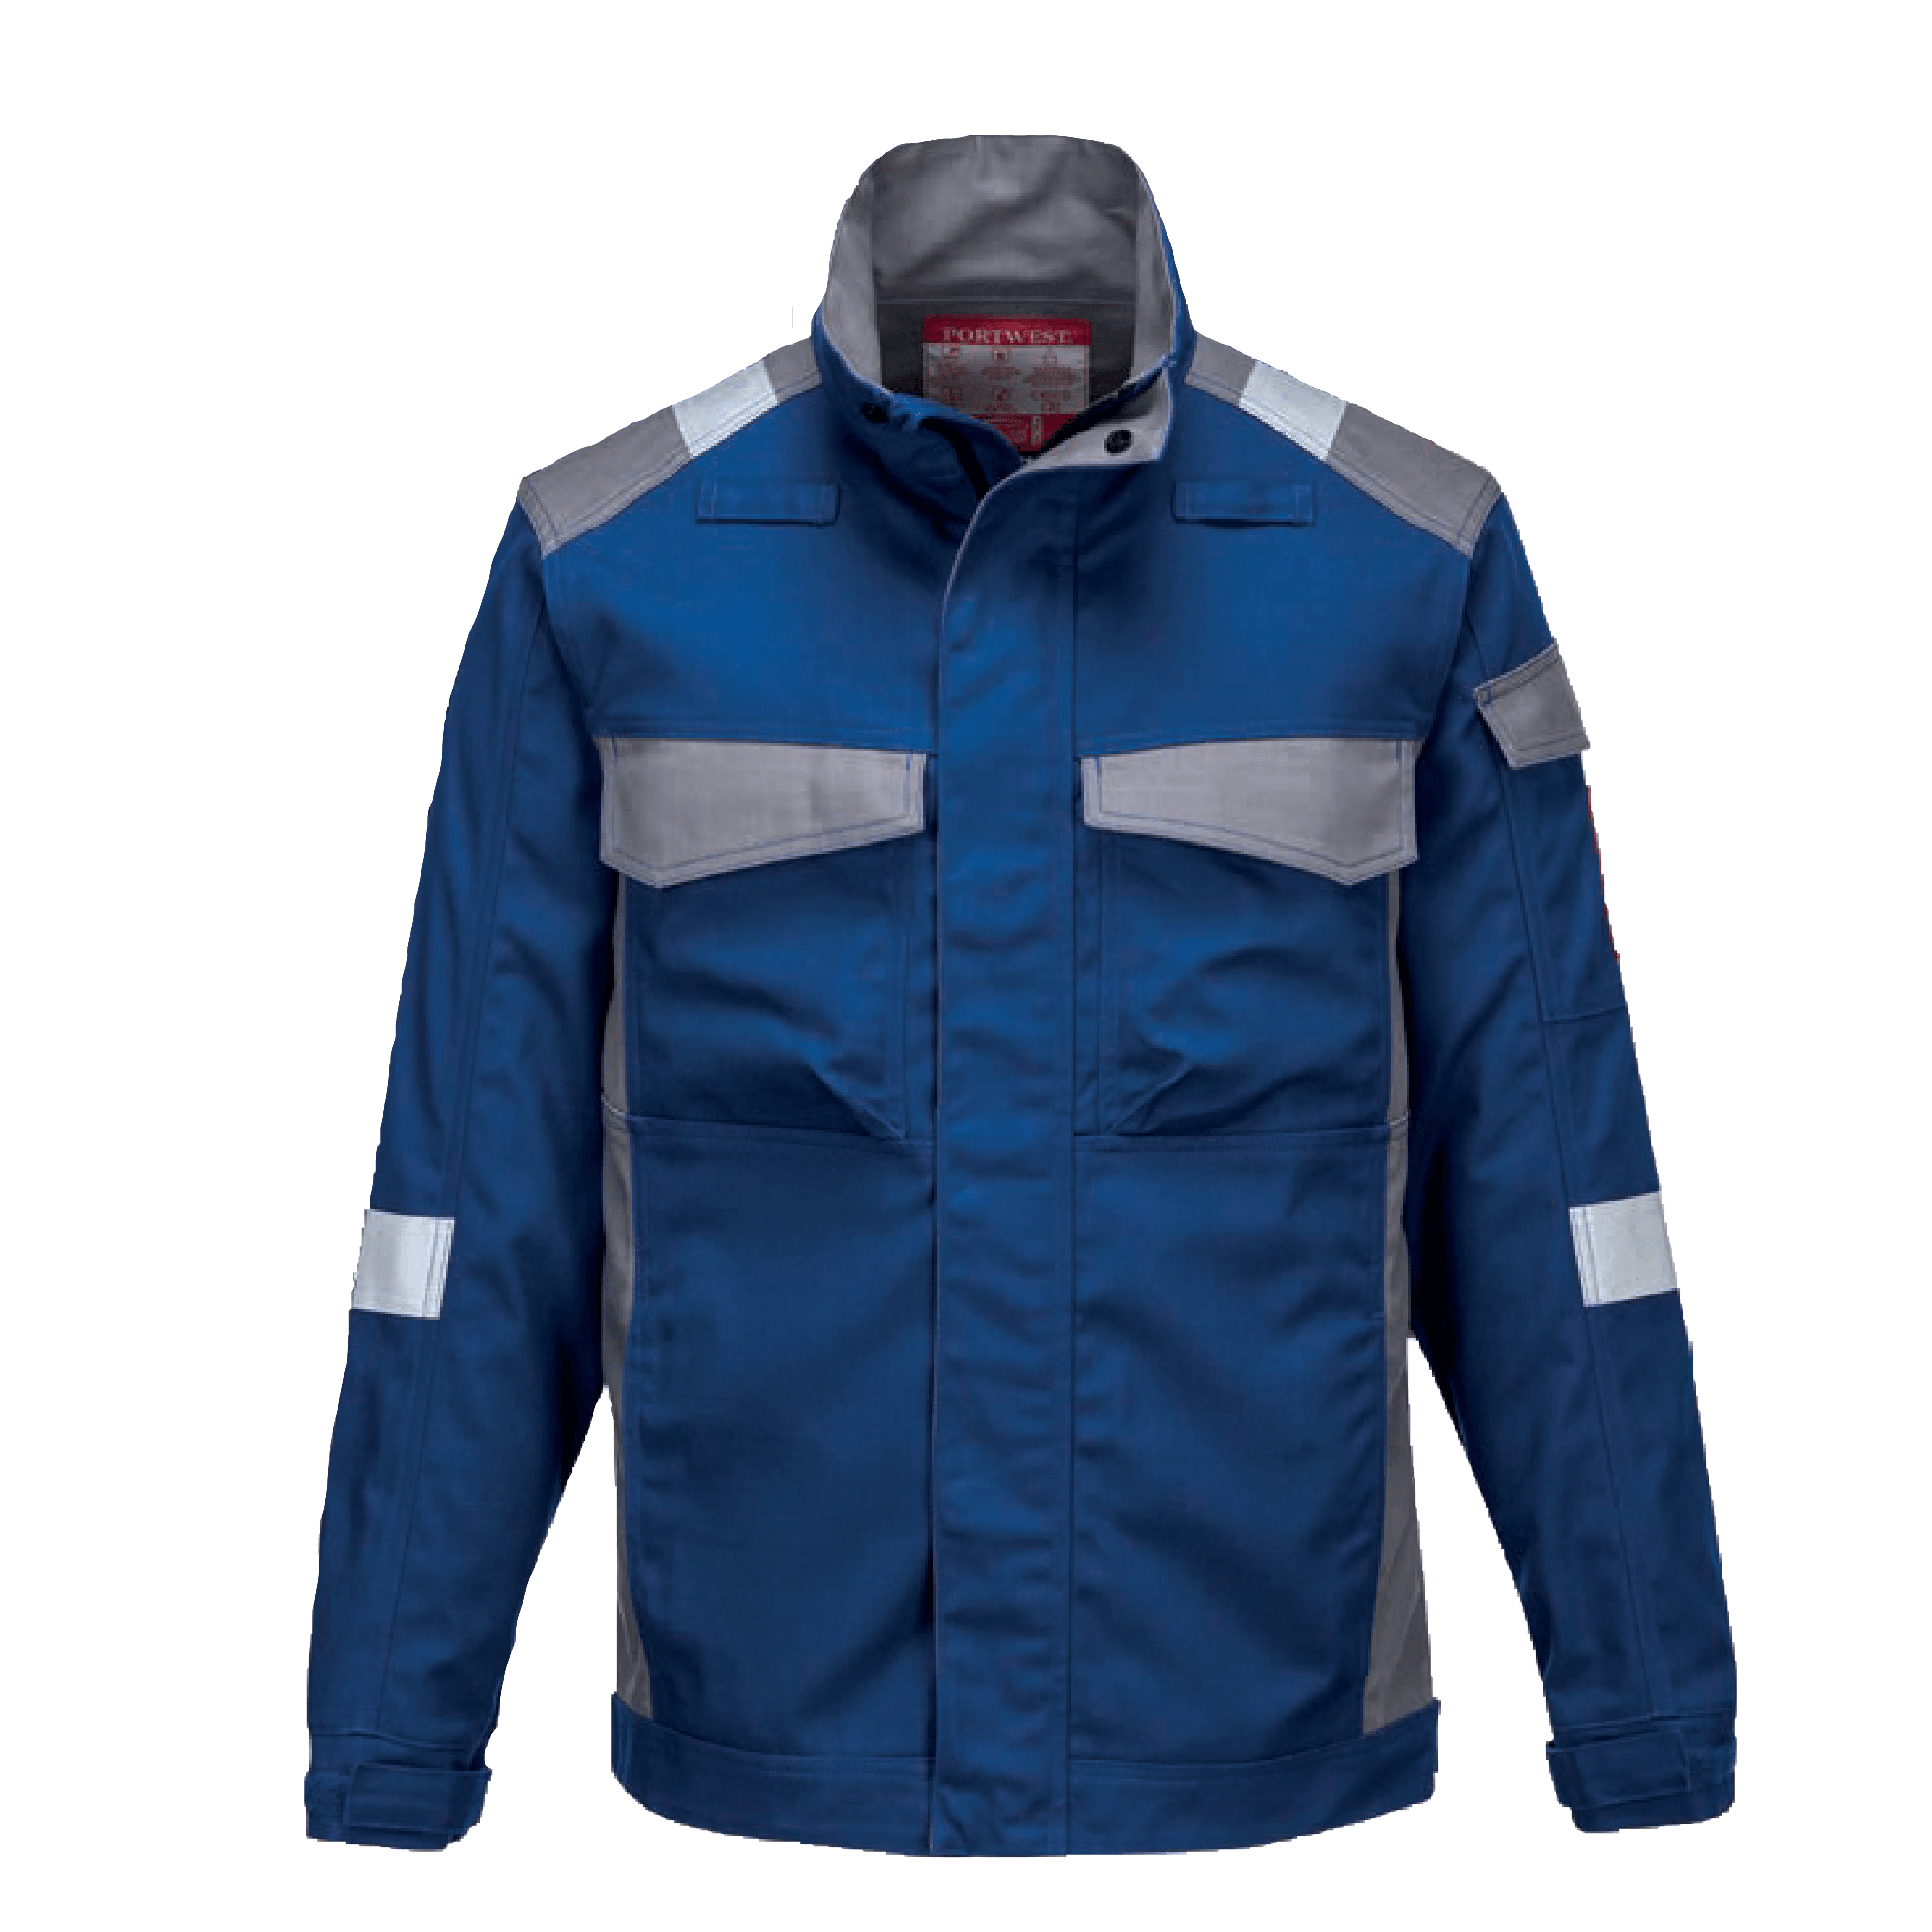 Portwest Bizflame Ultra Coverall, Jacket & Trouser - Safetyware